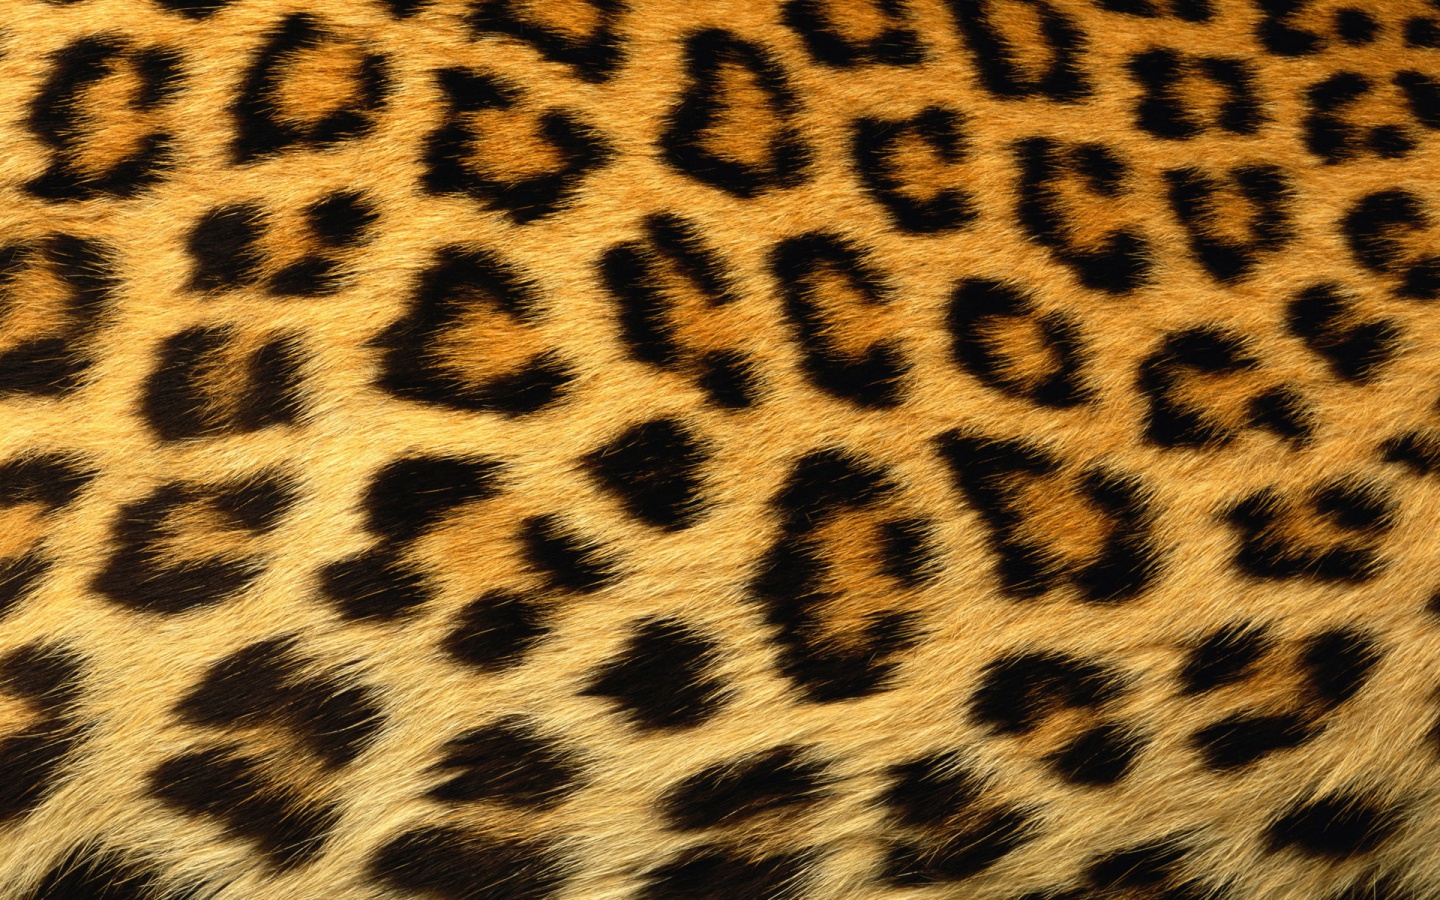 Leopard Print Background X Image At Clker